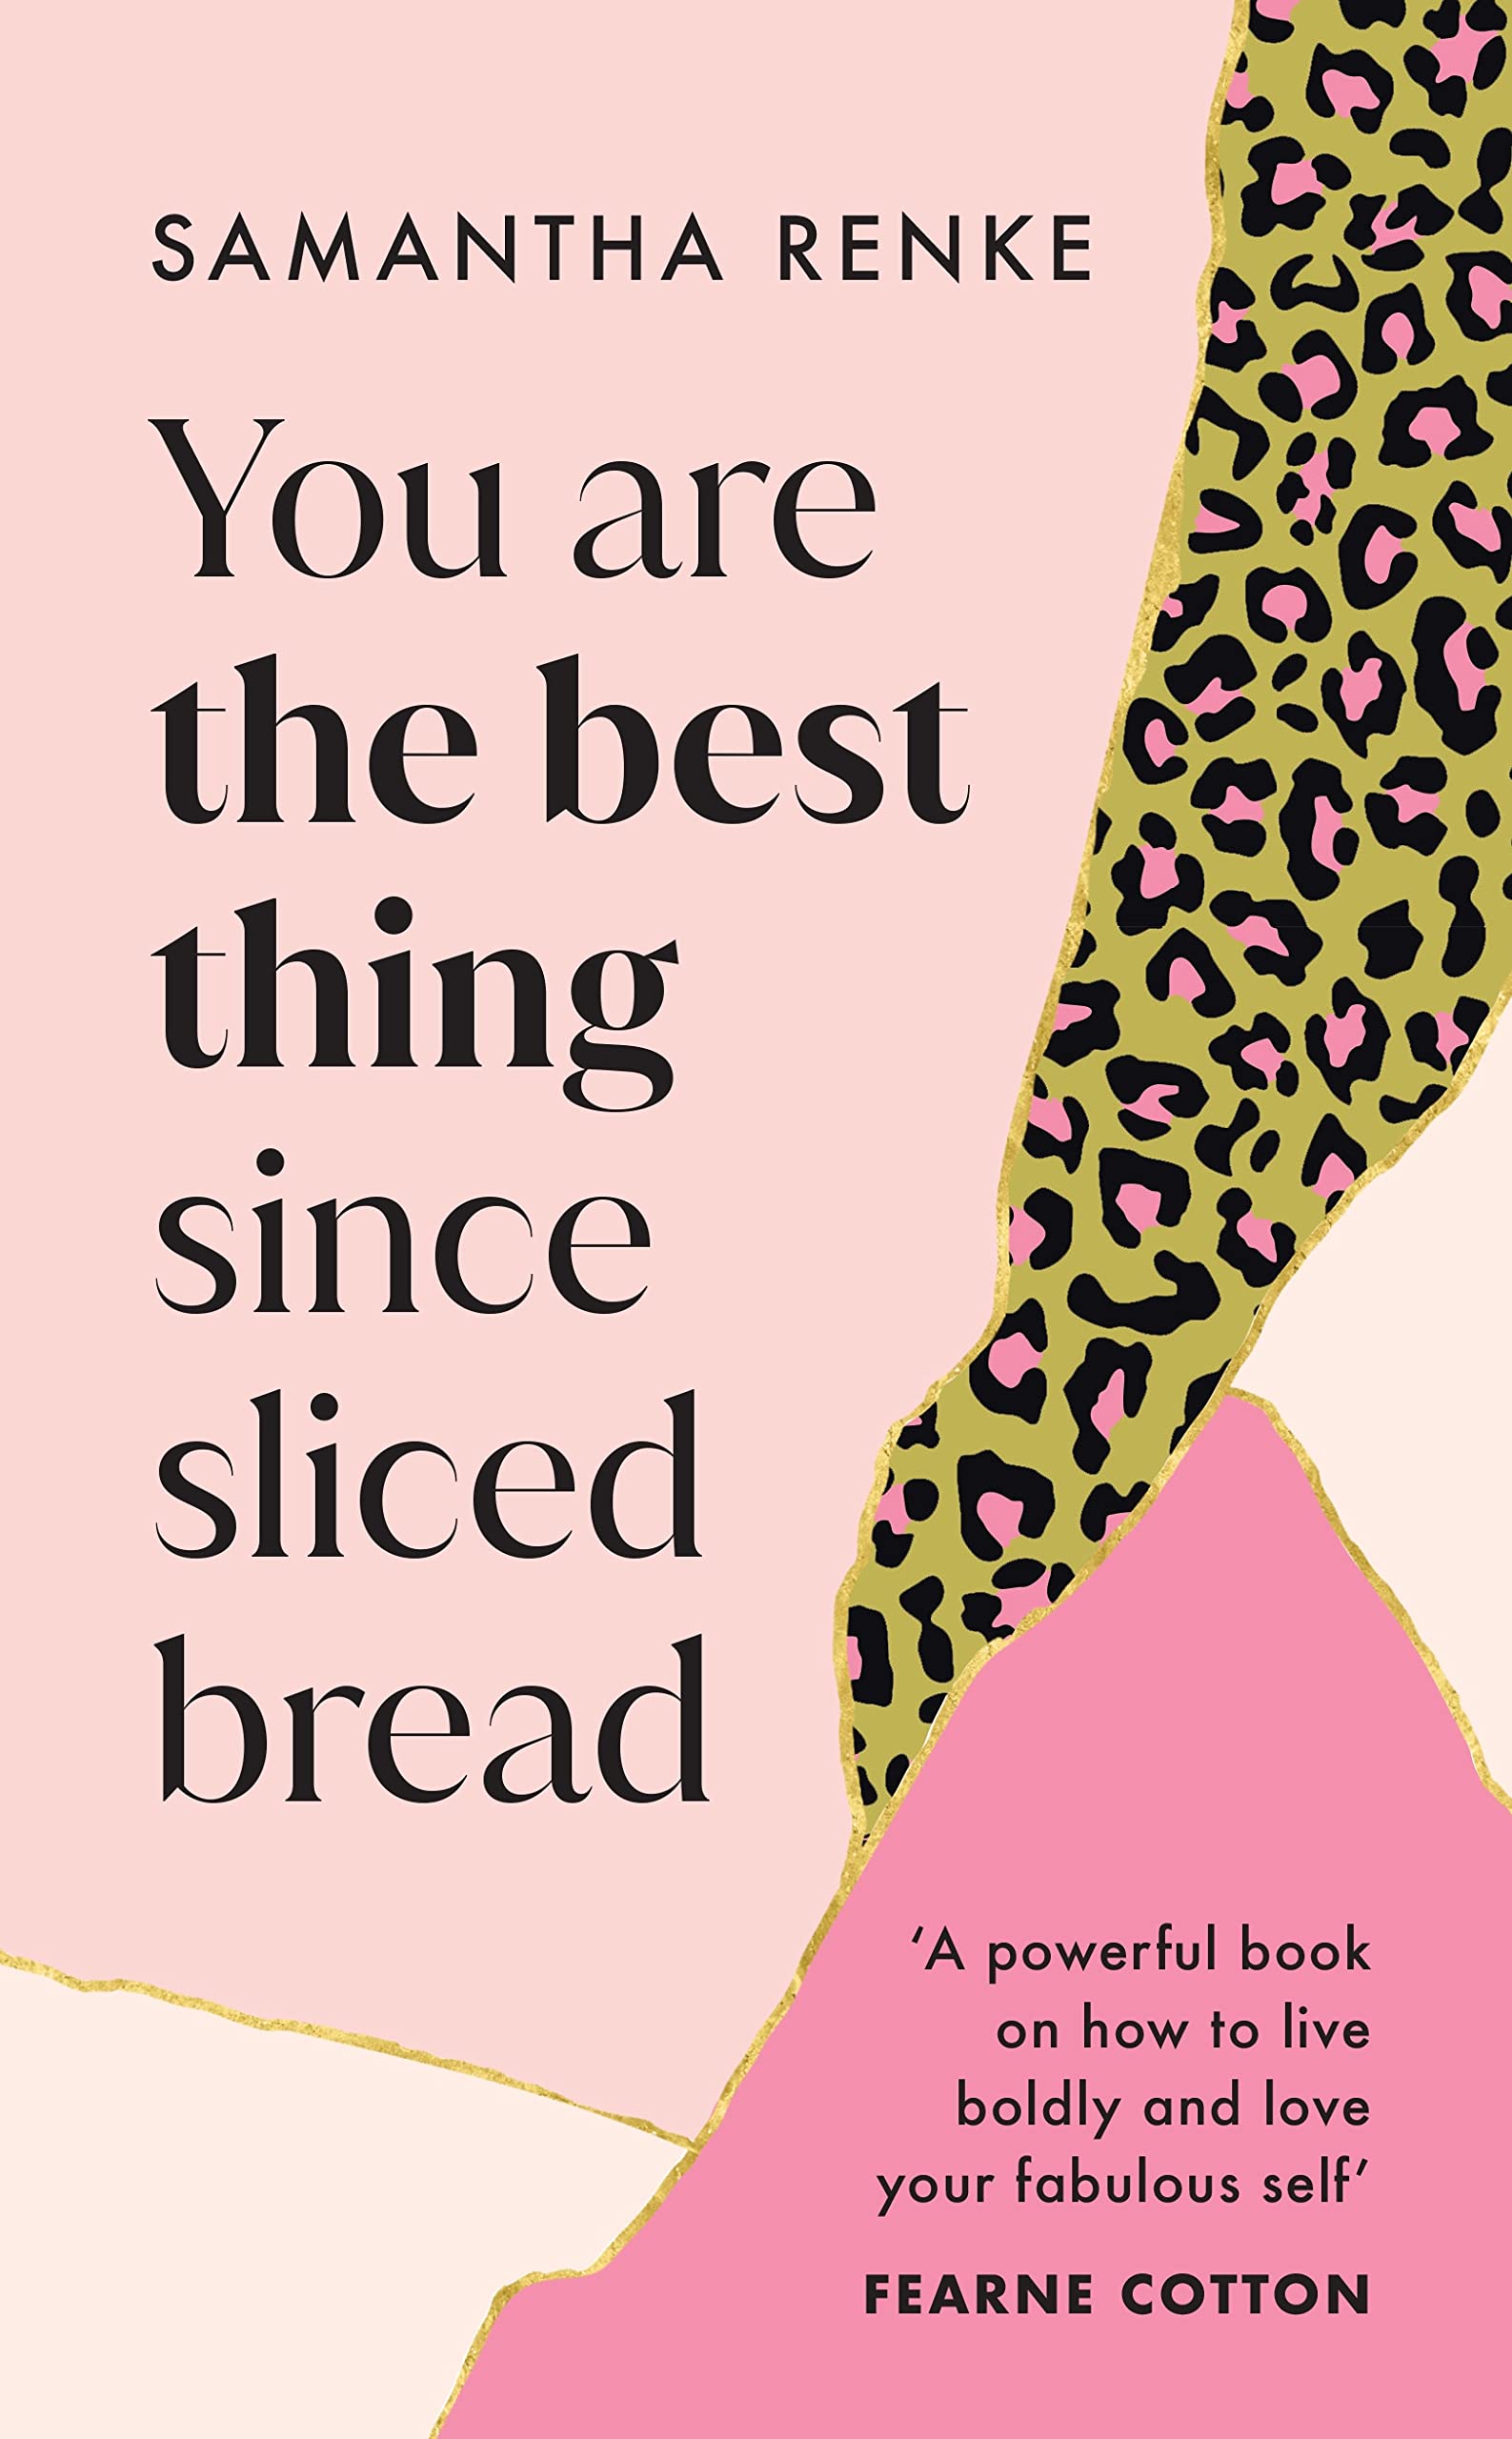 Book cover for You are the Best Thing Since Sliced Bread by Samantha Renke featuring a kintsugi-influenced design of gold holding sections of pink and leopard print together